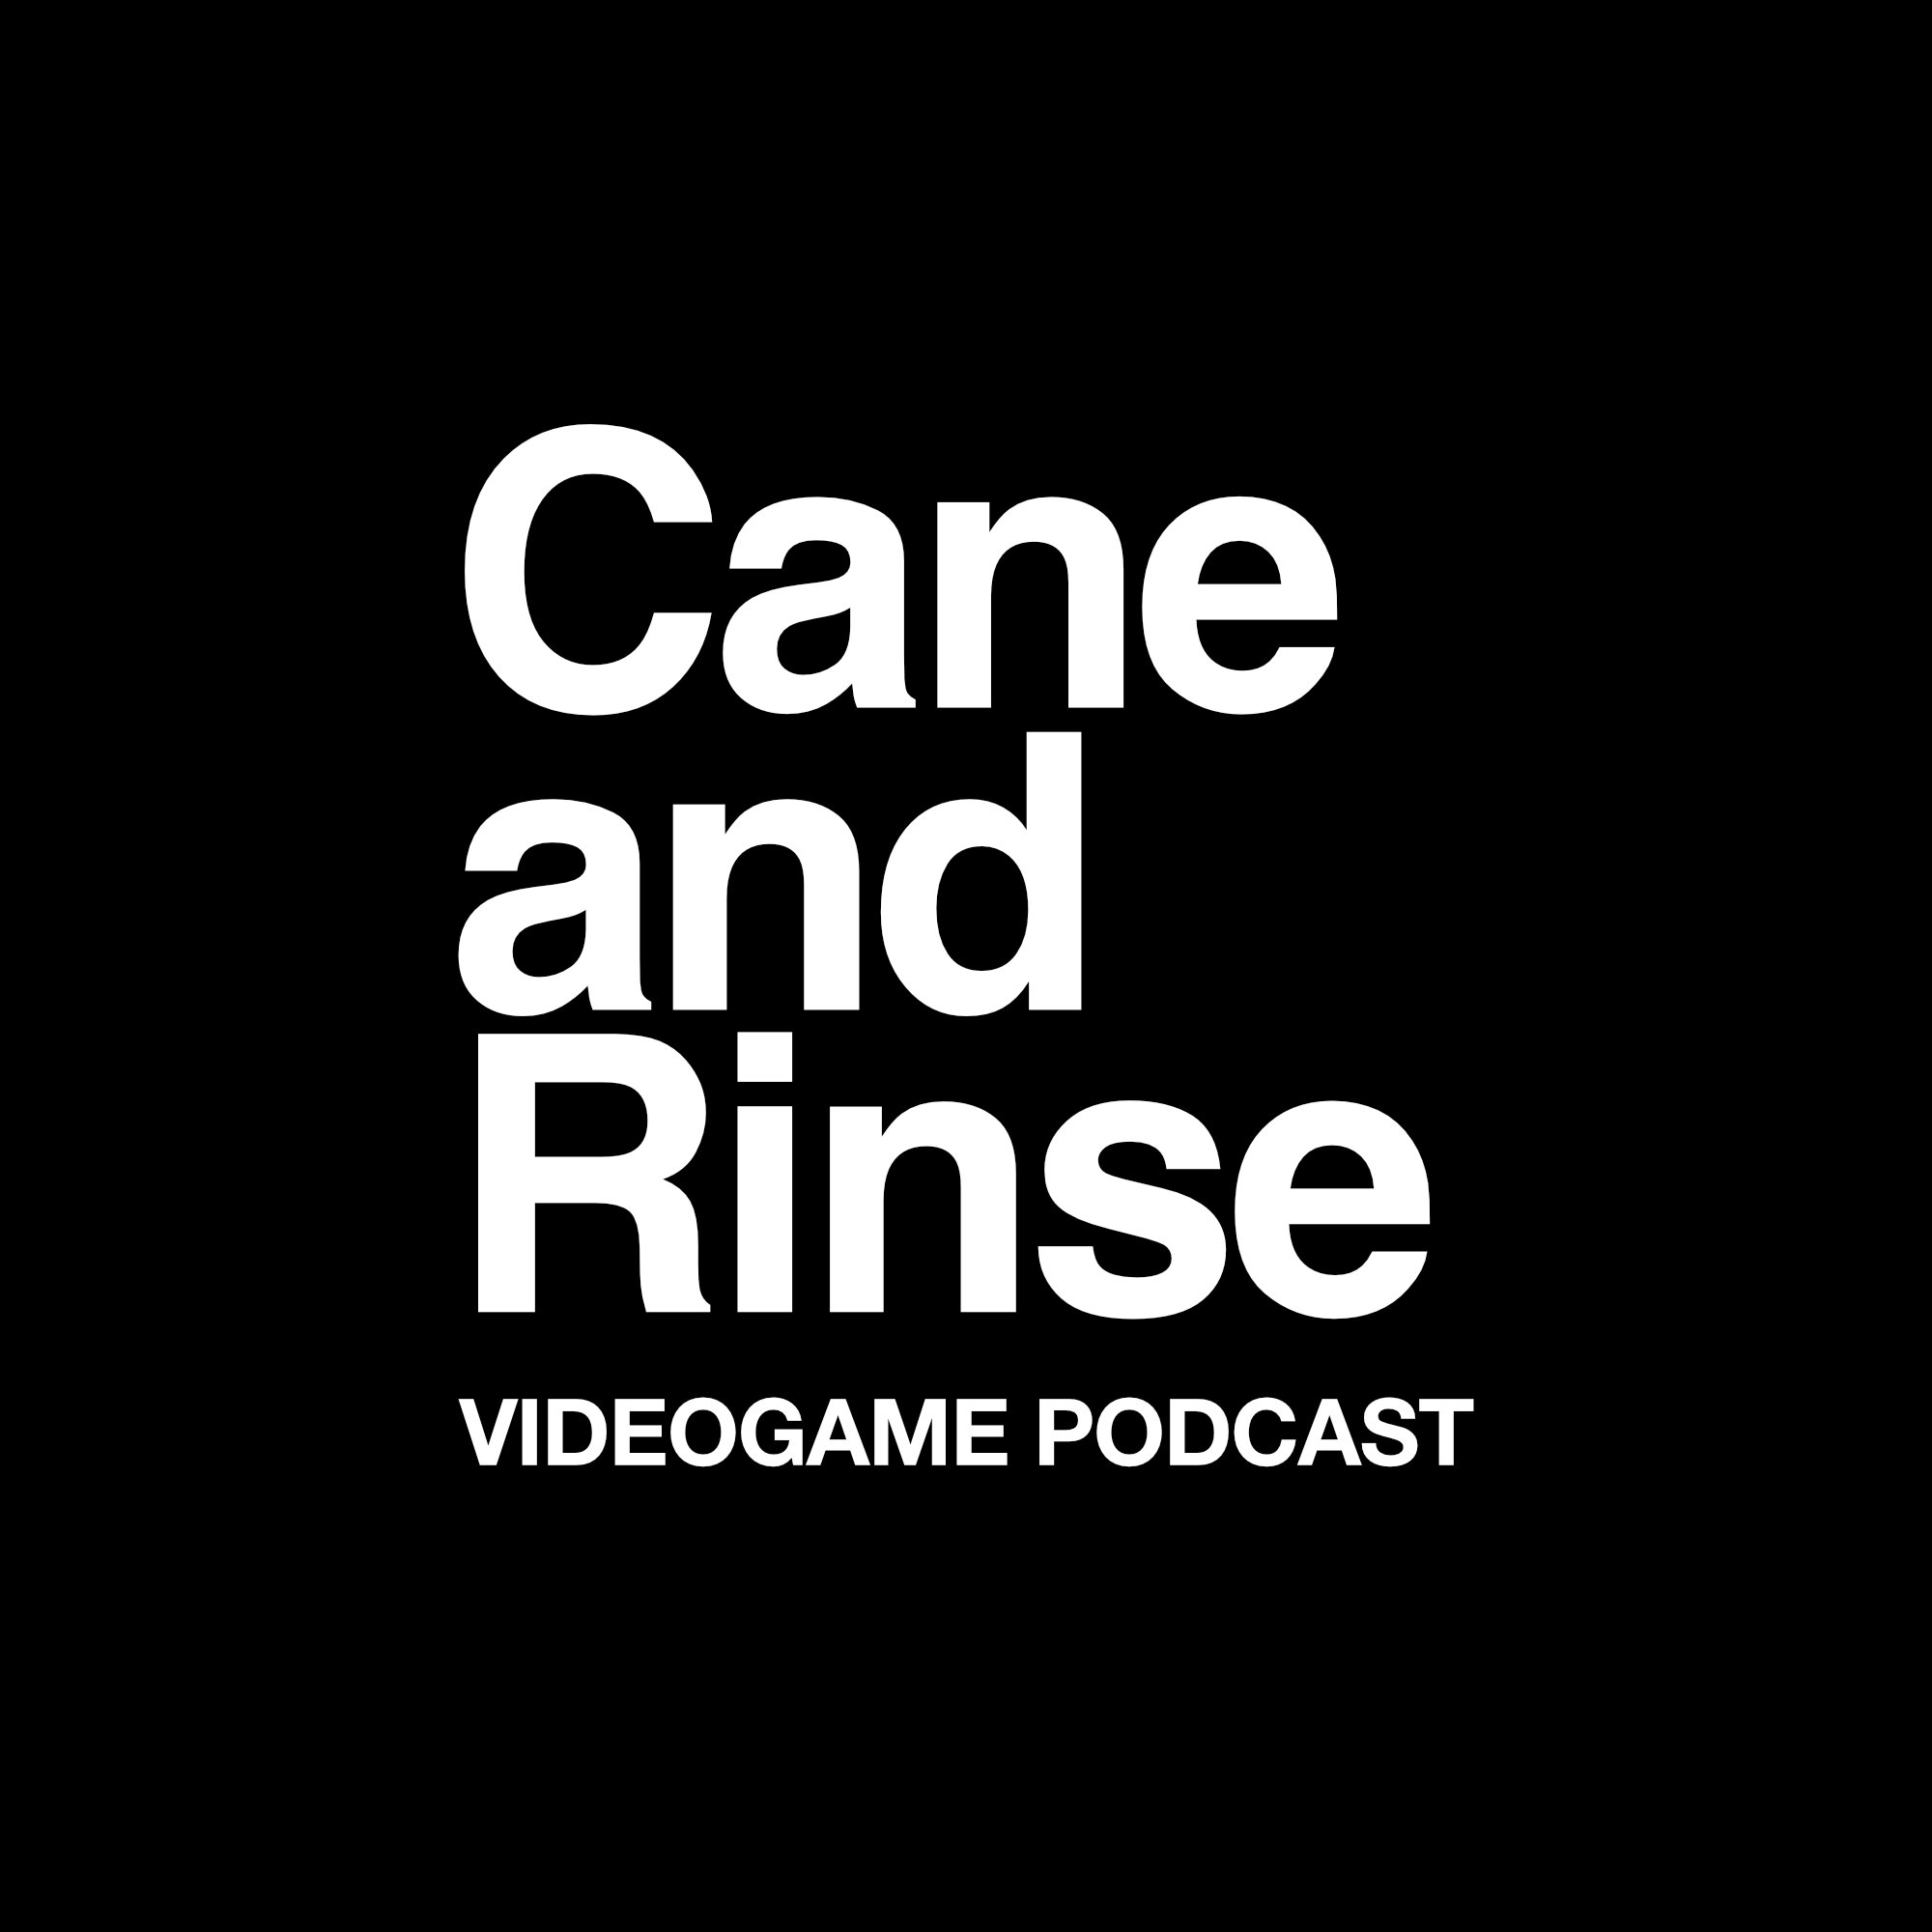 The Cane and Rinse videogame podcast podcast